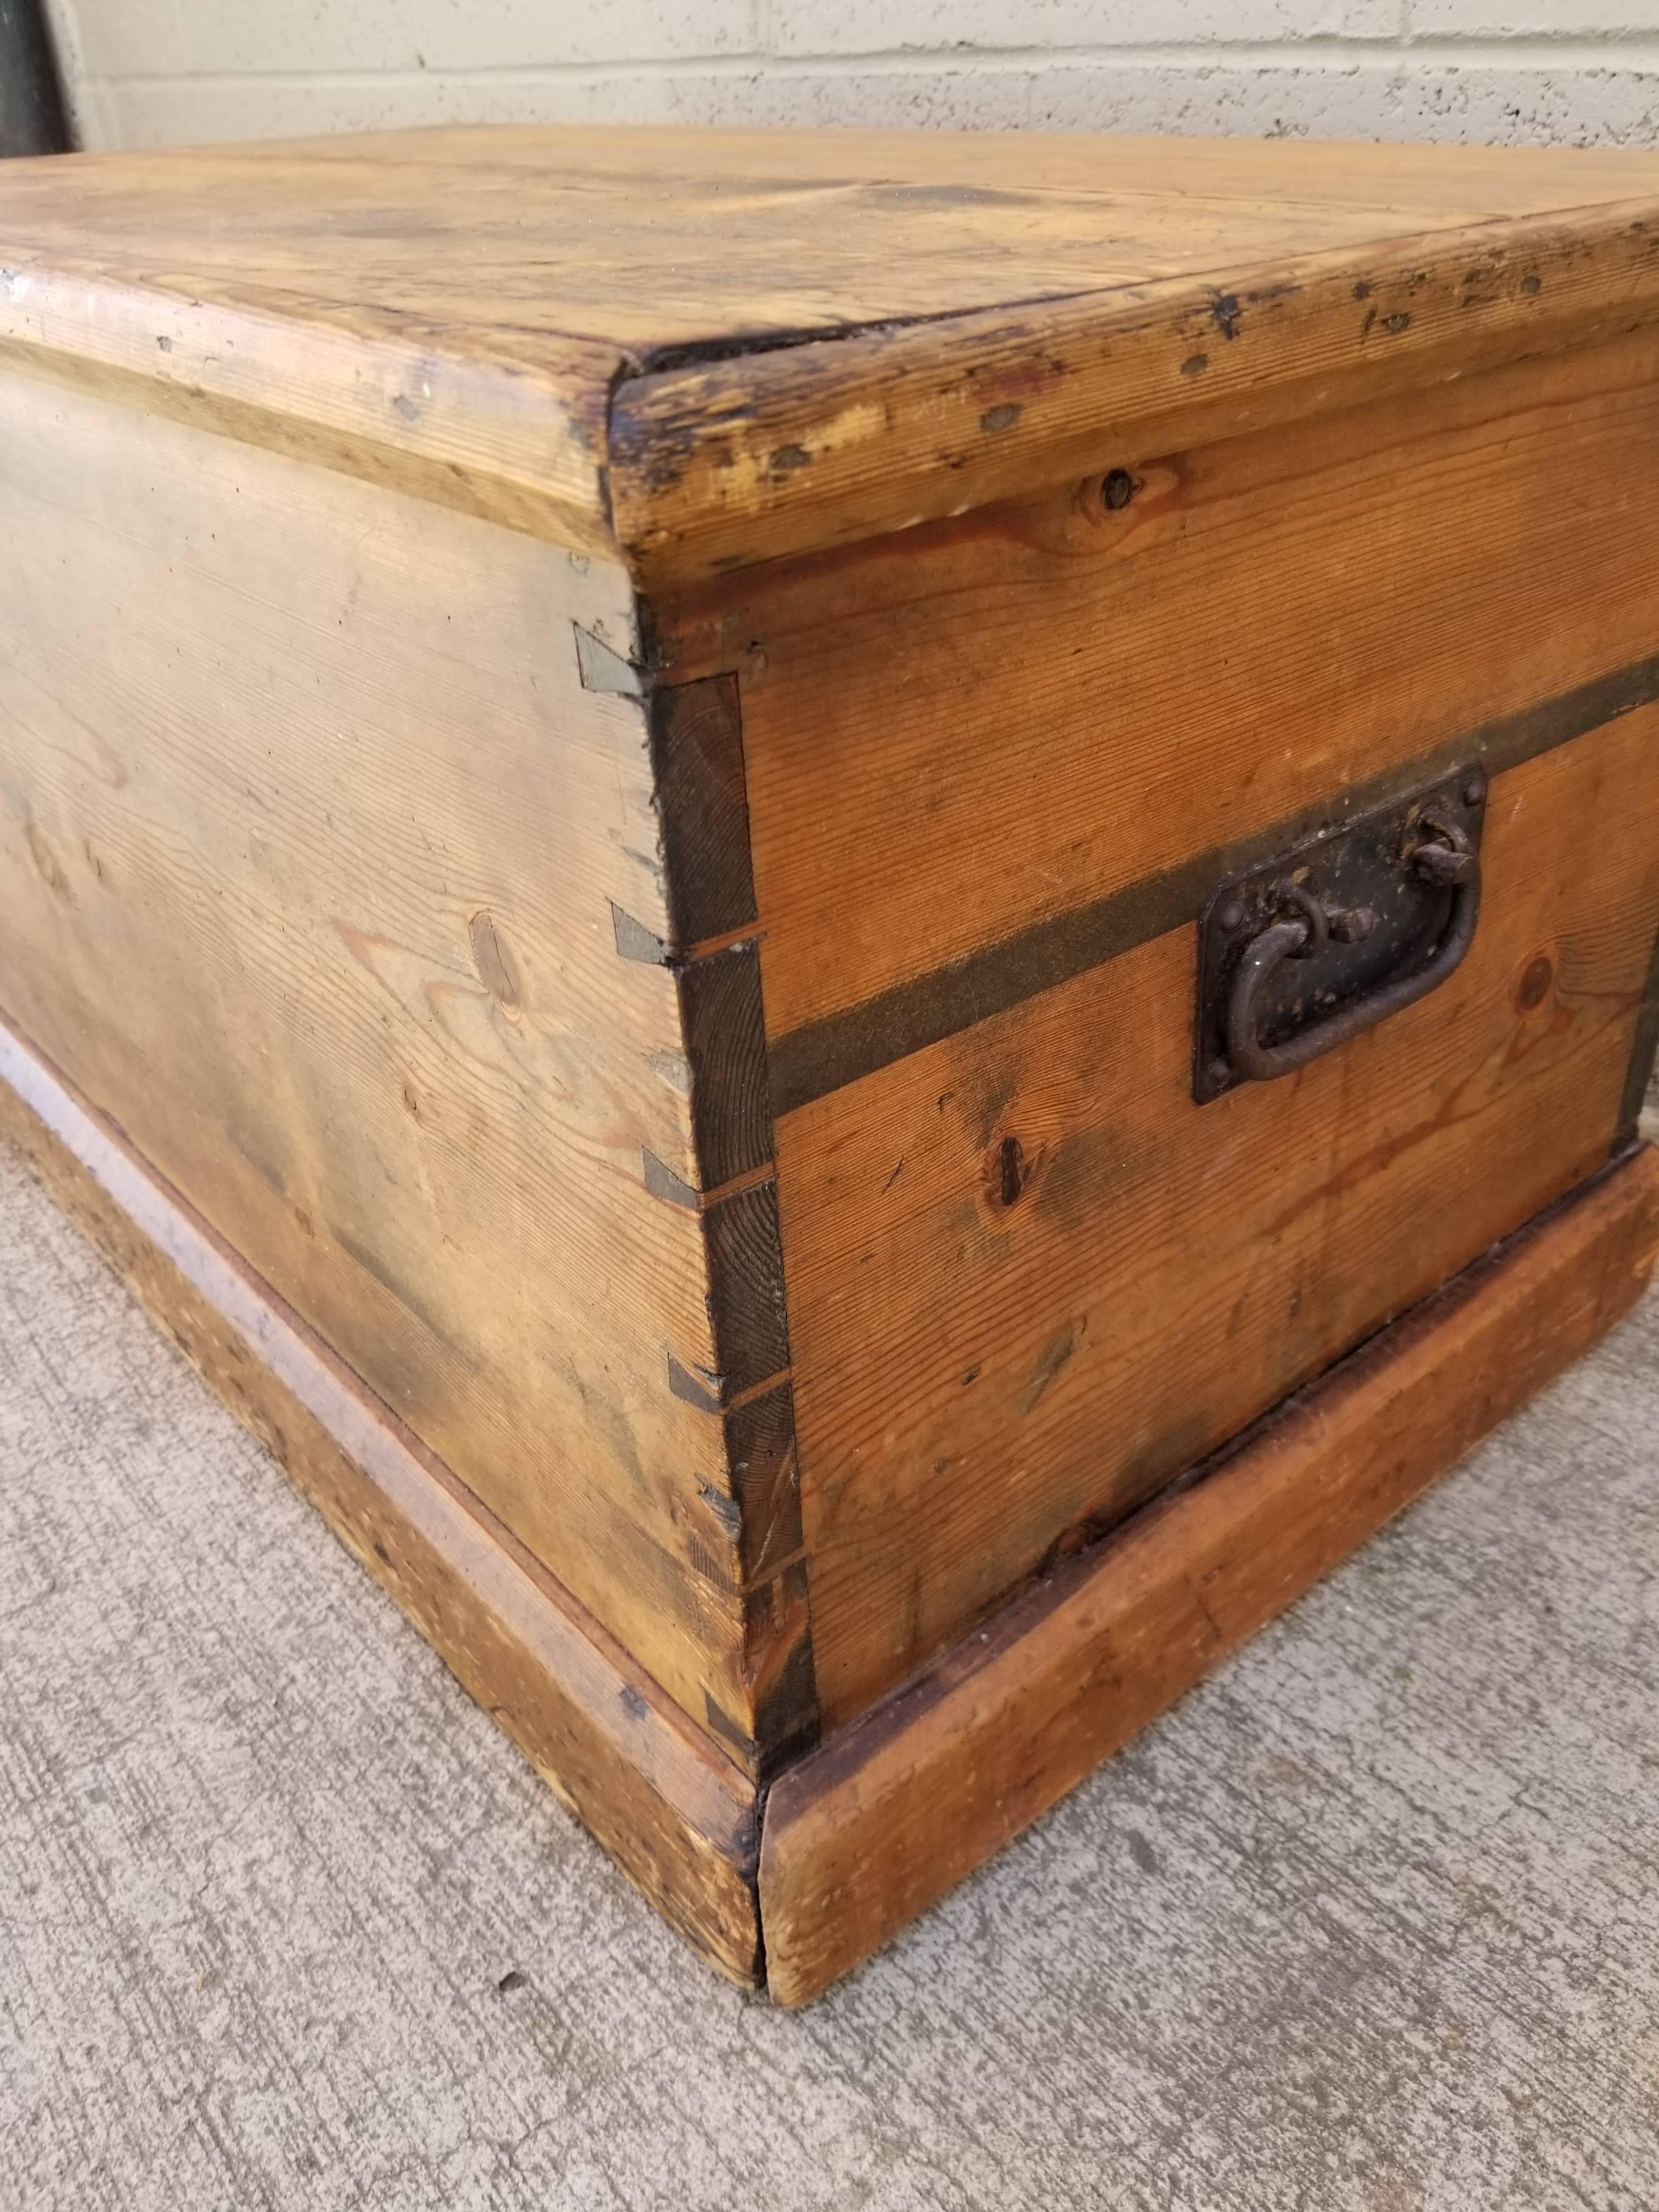 A late 19th century pine trunk. Exposed hand scribed dovetail. All original iron hardware intact, including lock. Would work well as a coffee or end table offering additional storage.